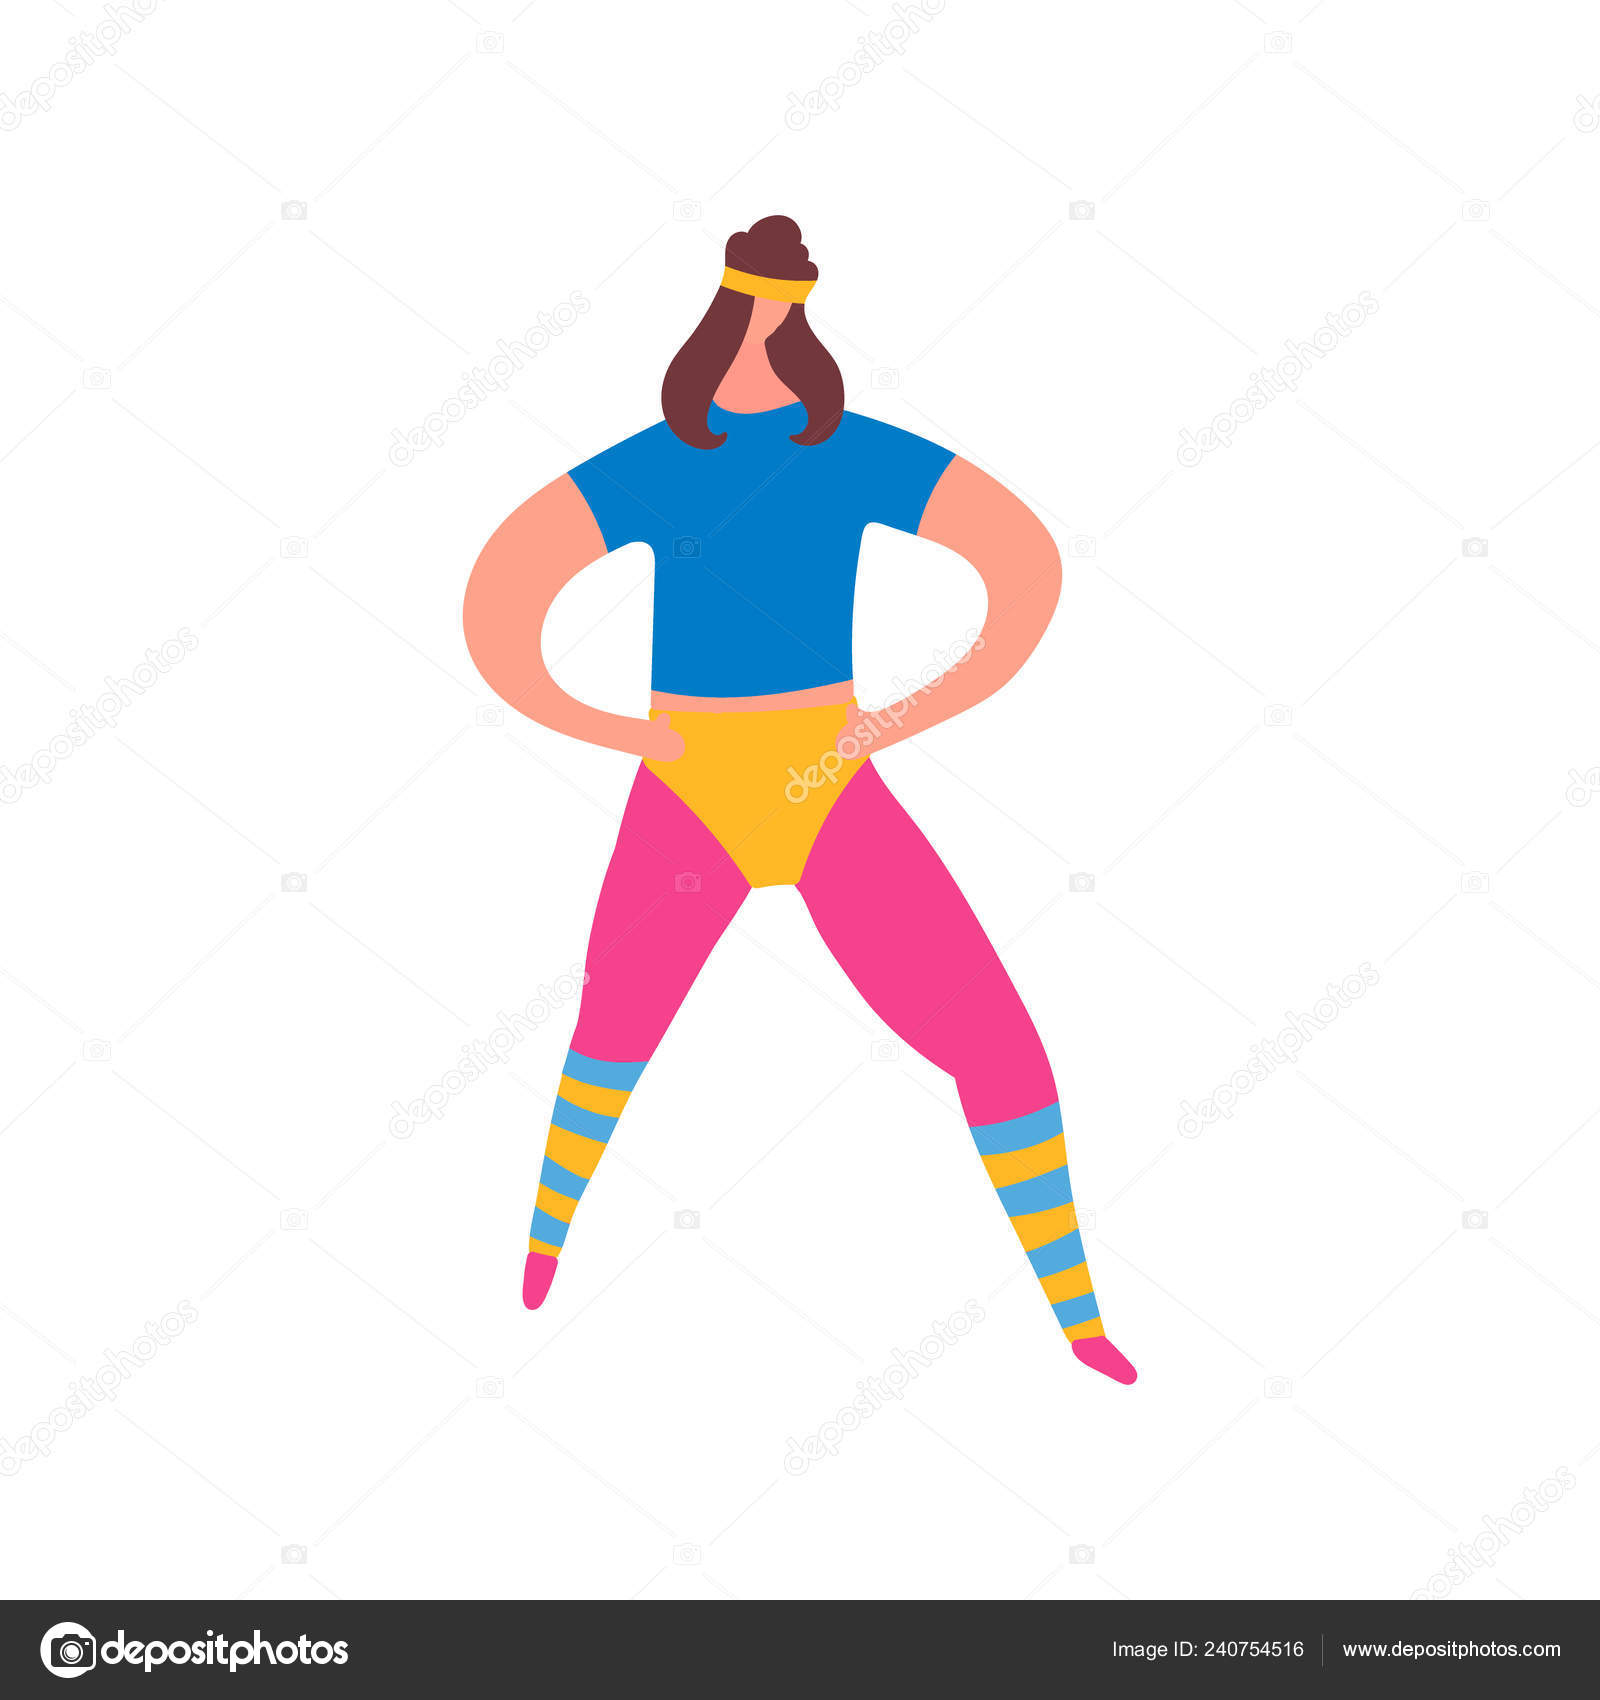 80s years woman girl in aerobics outfit doing workout shaping